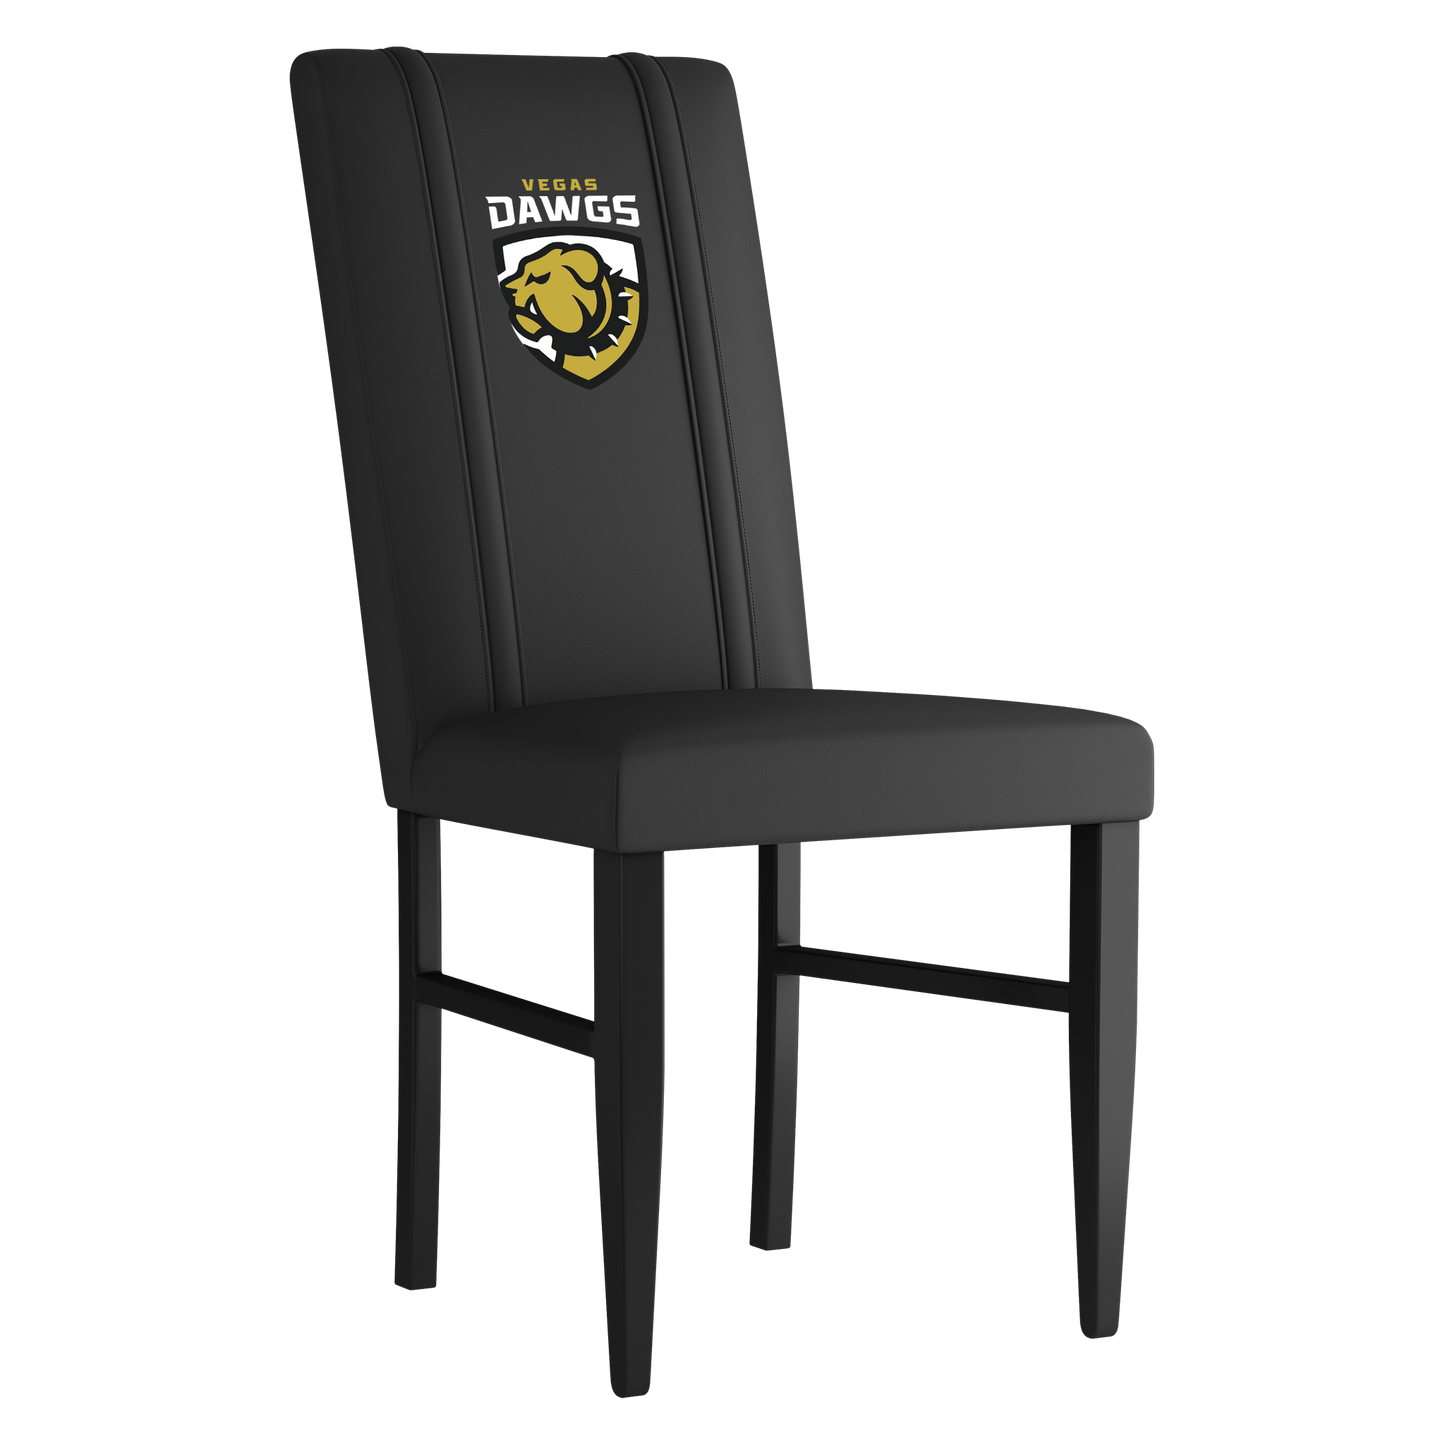 Side Chair 2000 with Vegas Dawgs Logo Set of 2